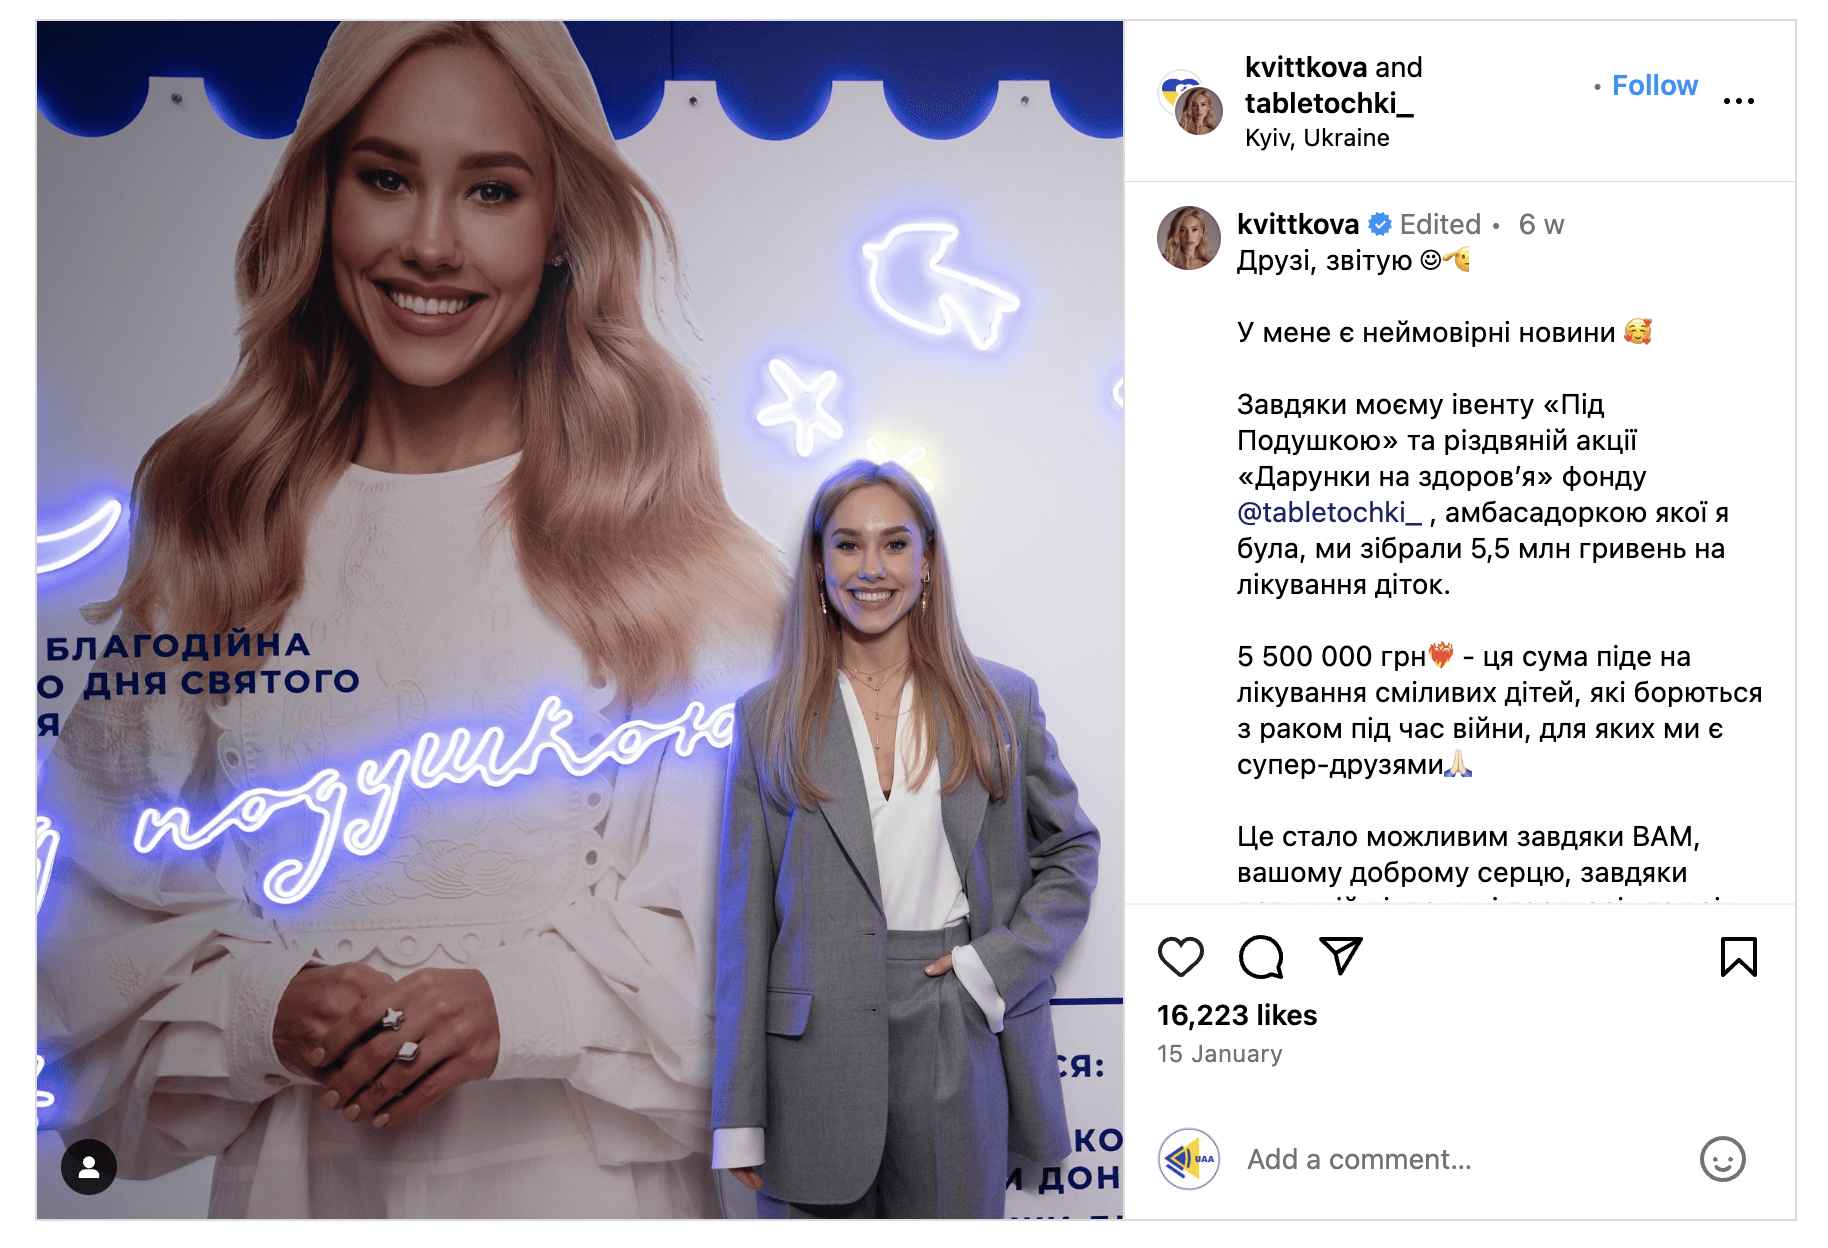 how to work with influencers on instagram and tiktok